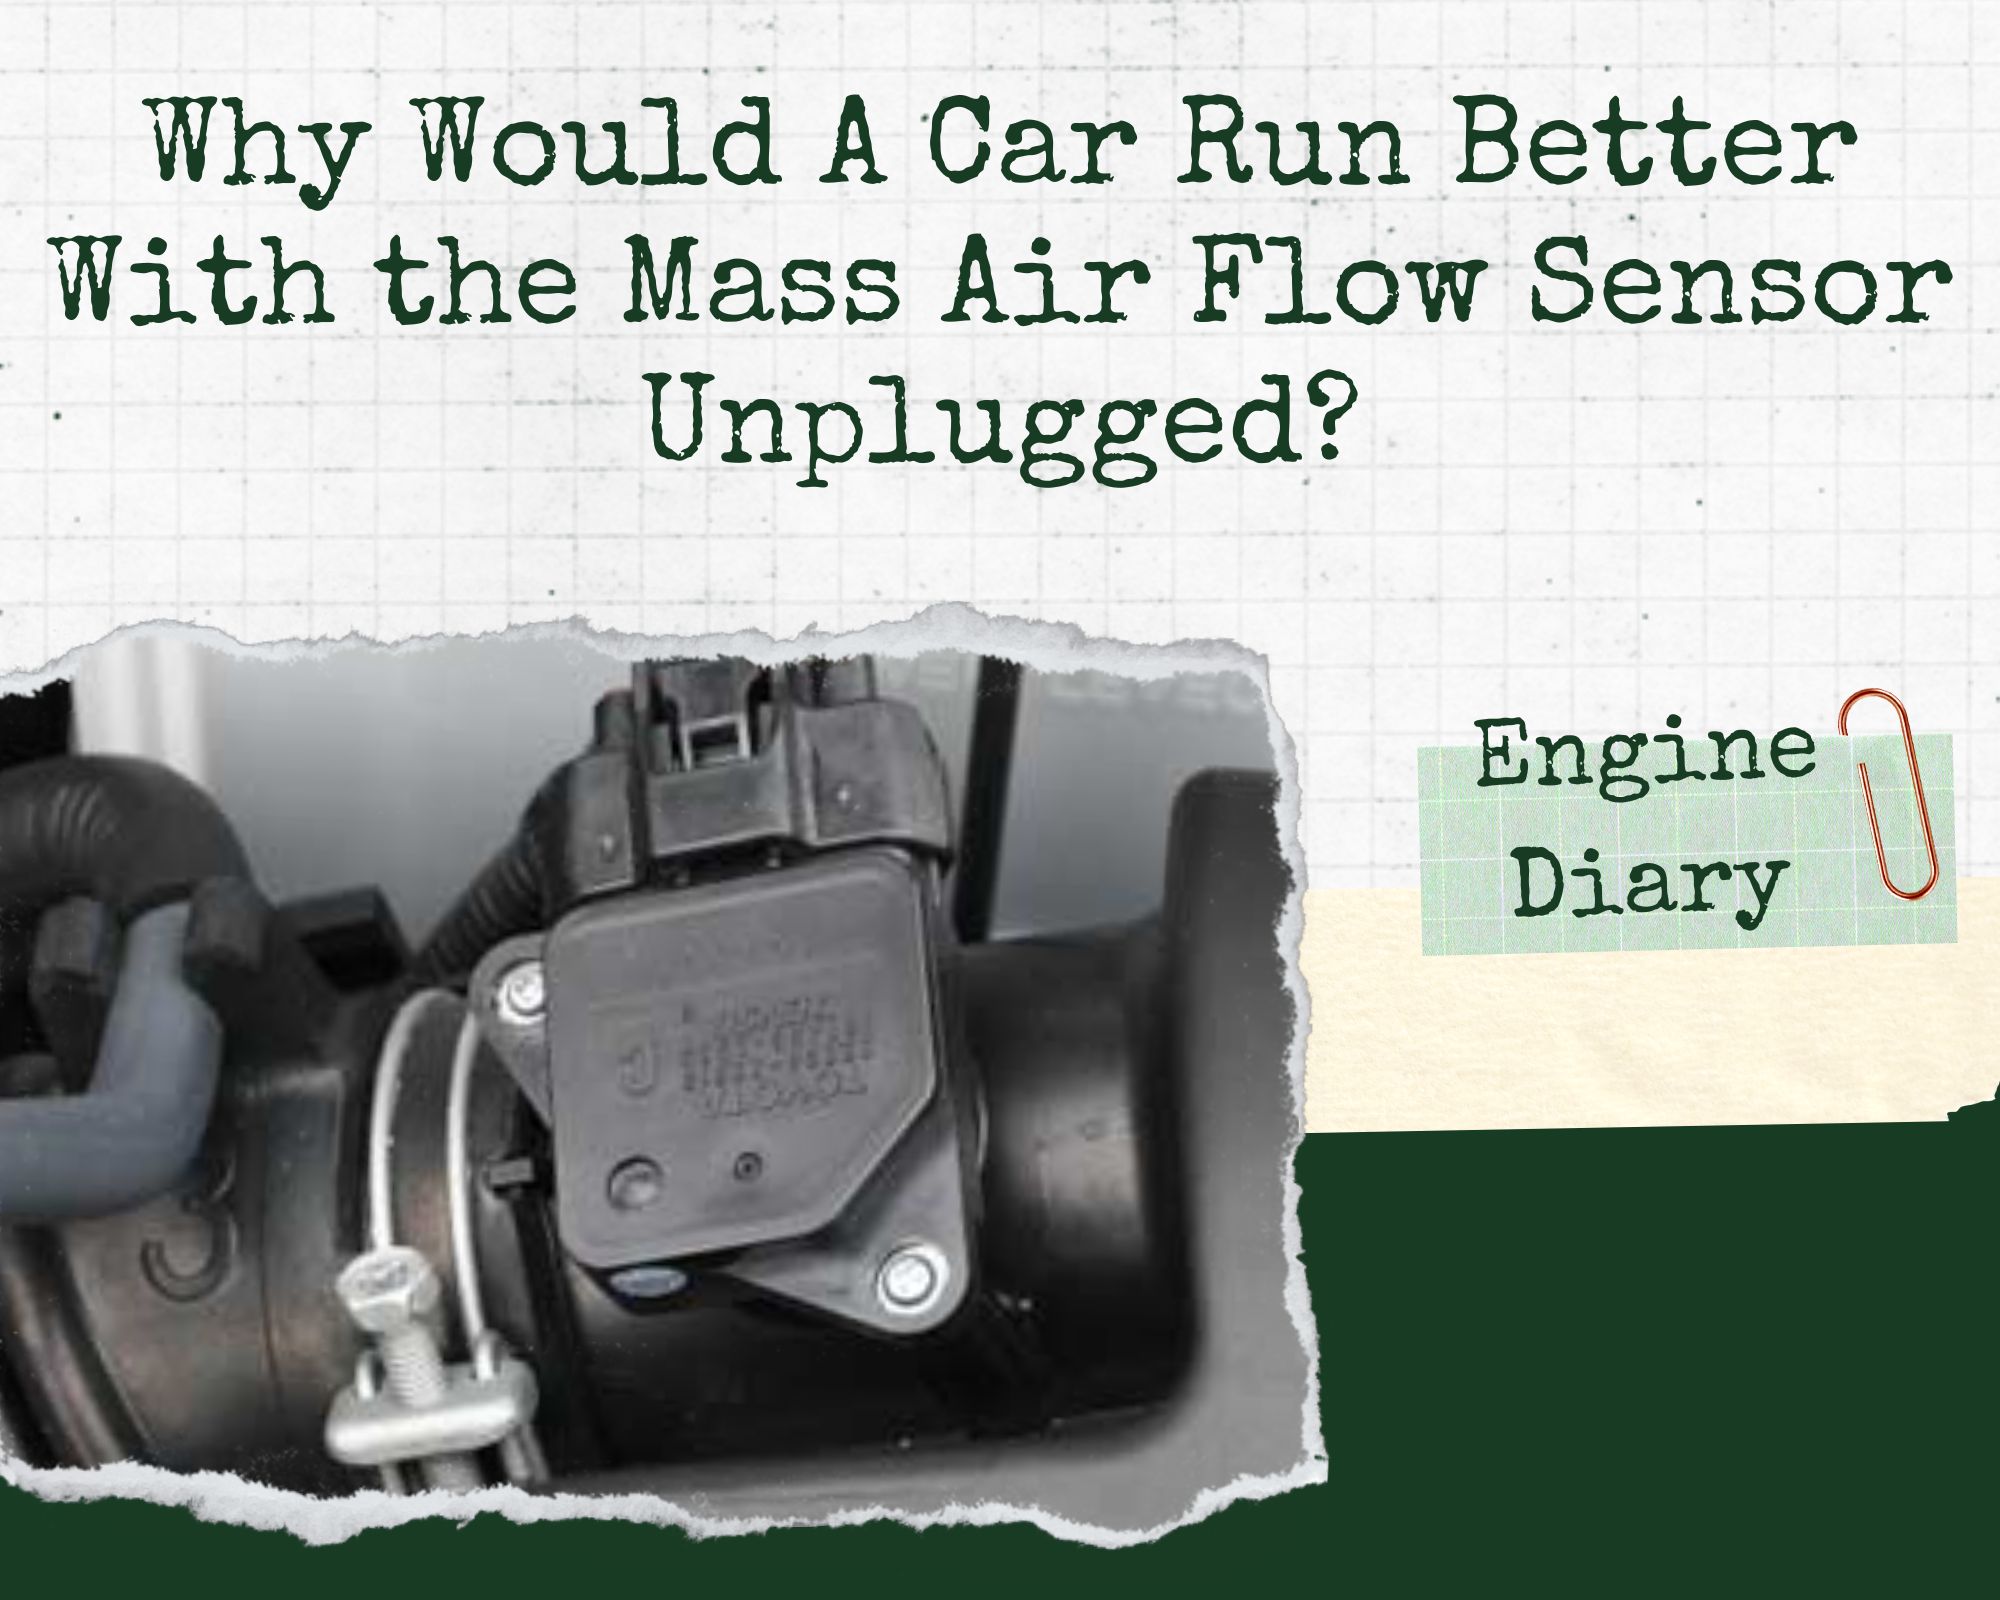 Why Would A Car Run Better With the Mass Air Flow Sensor Unplugged?